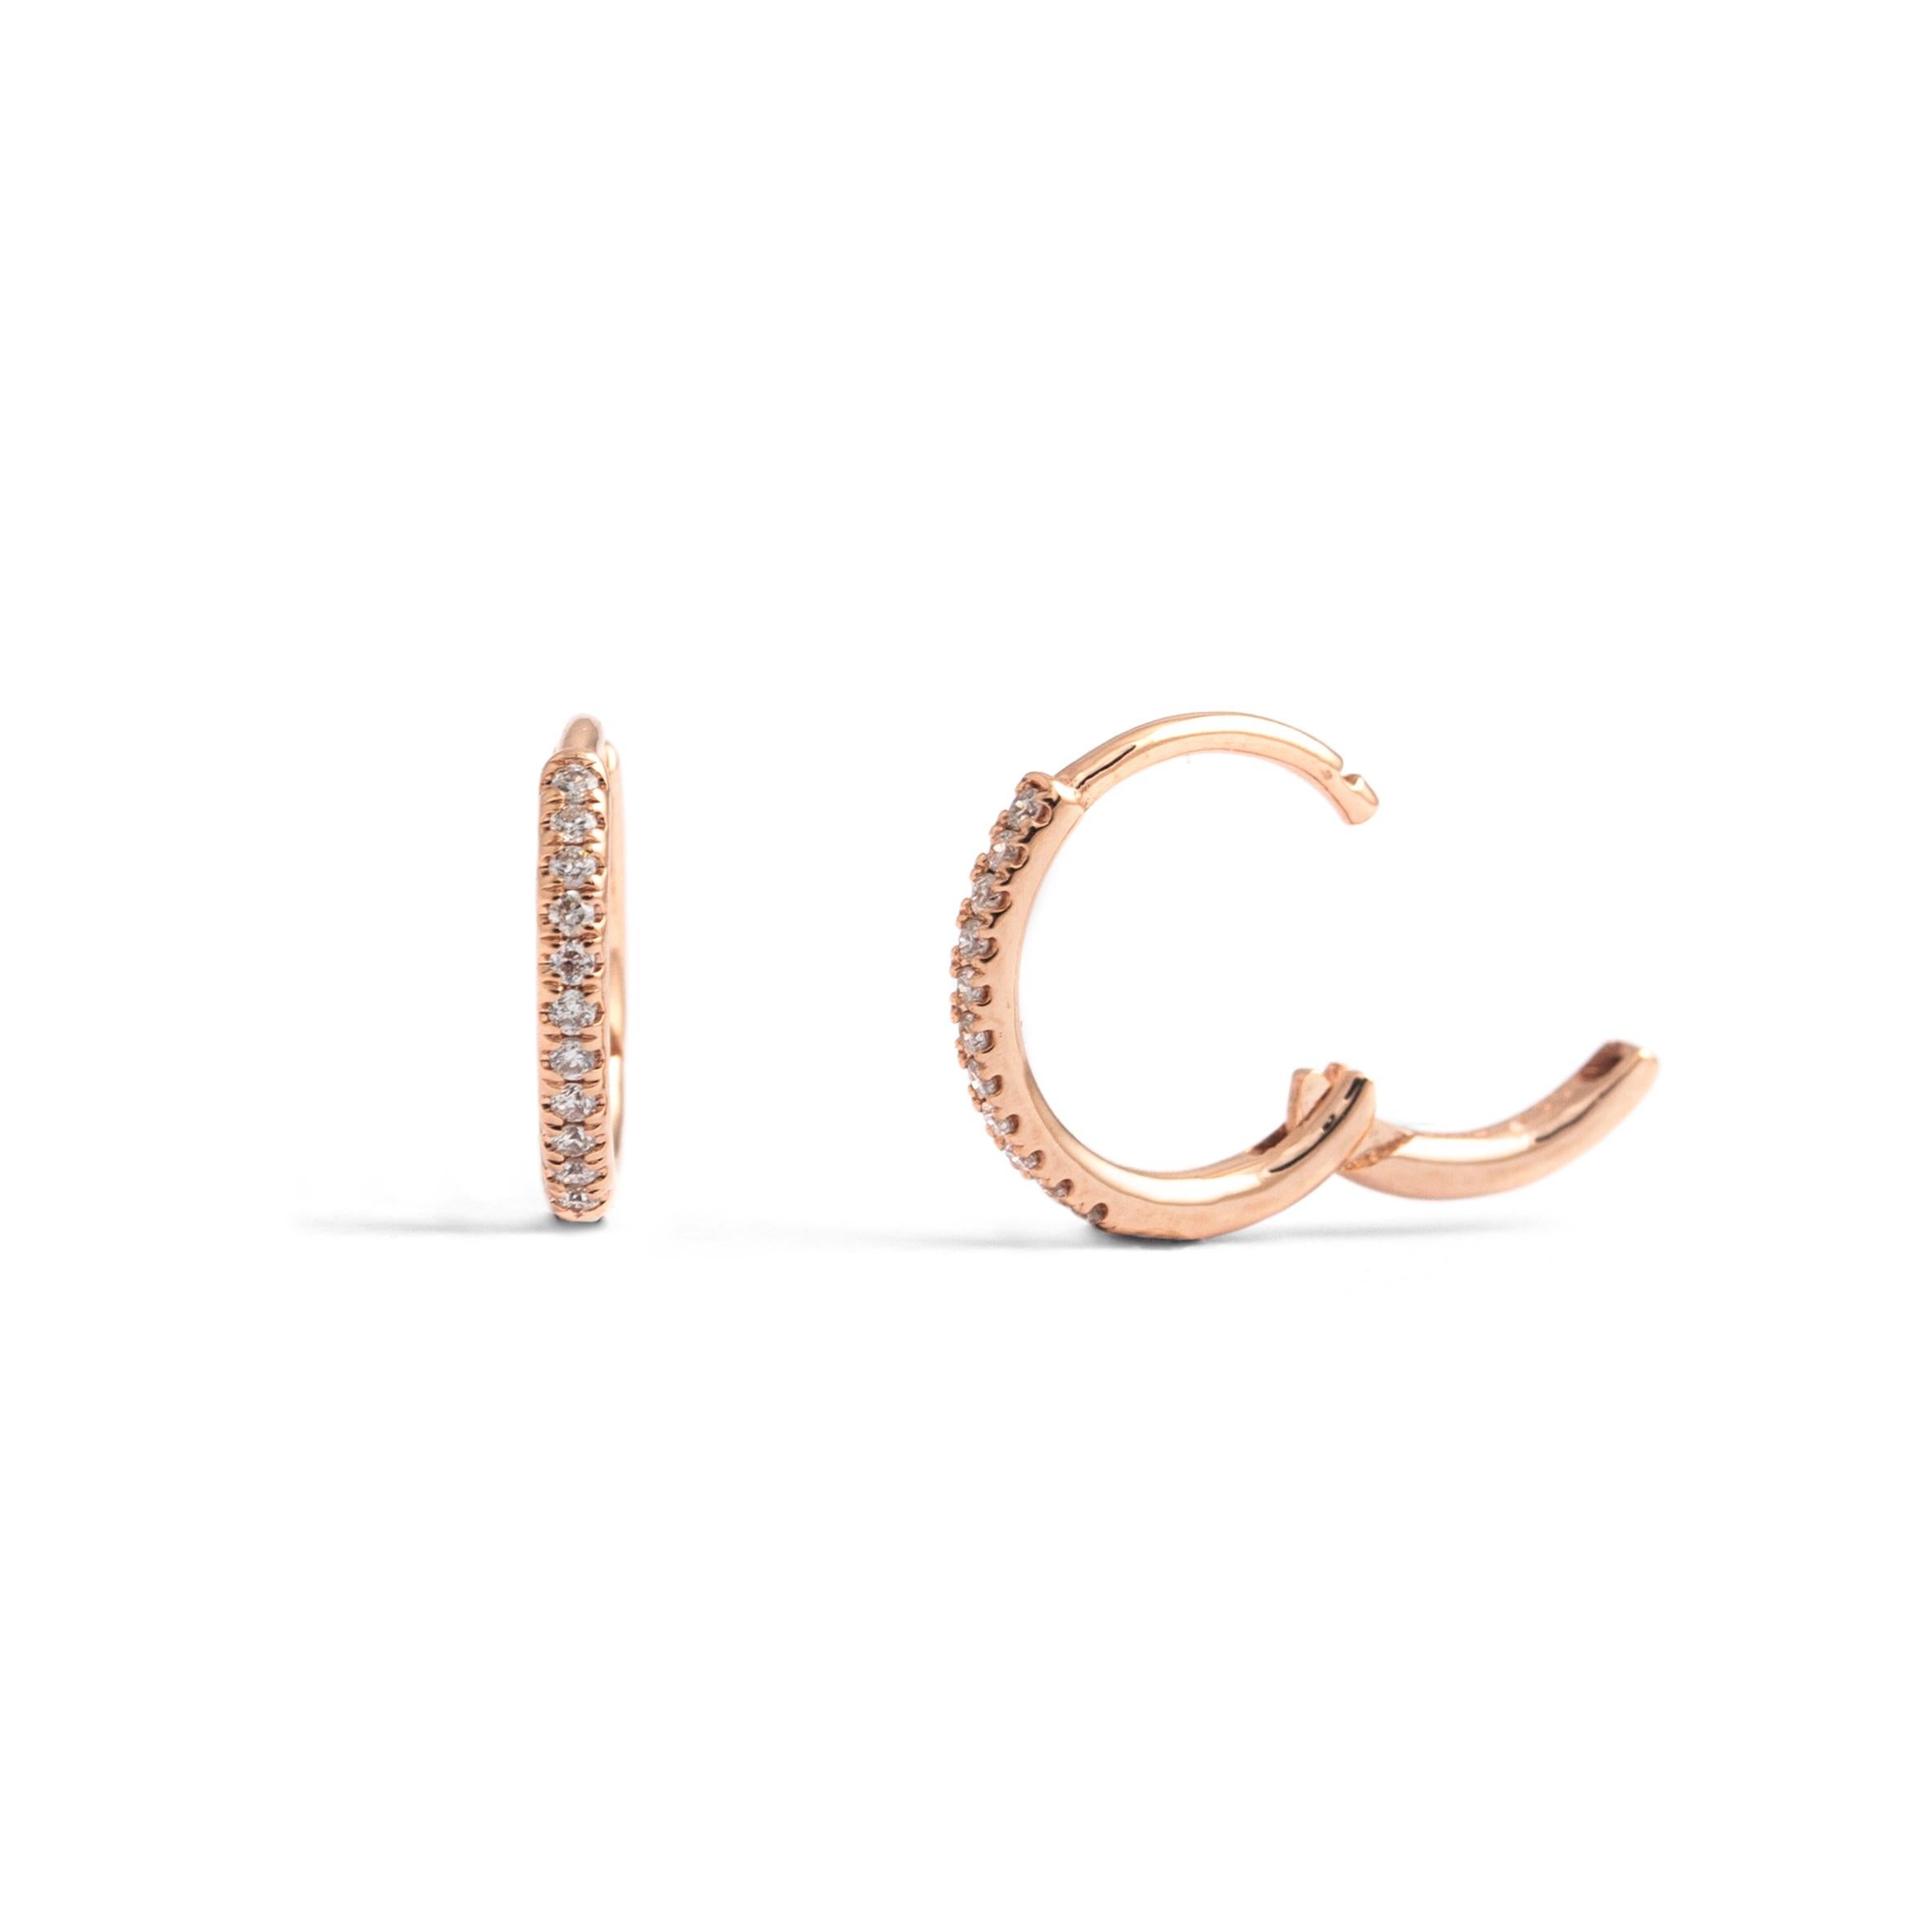 Earrings in rose gold 18K diamond 0.08 carat, estimated H color and Si1 clarity. 
Total gross weight: 1.03 grams.